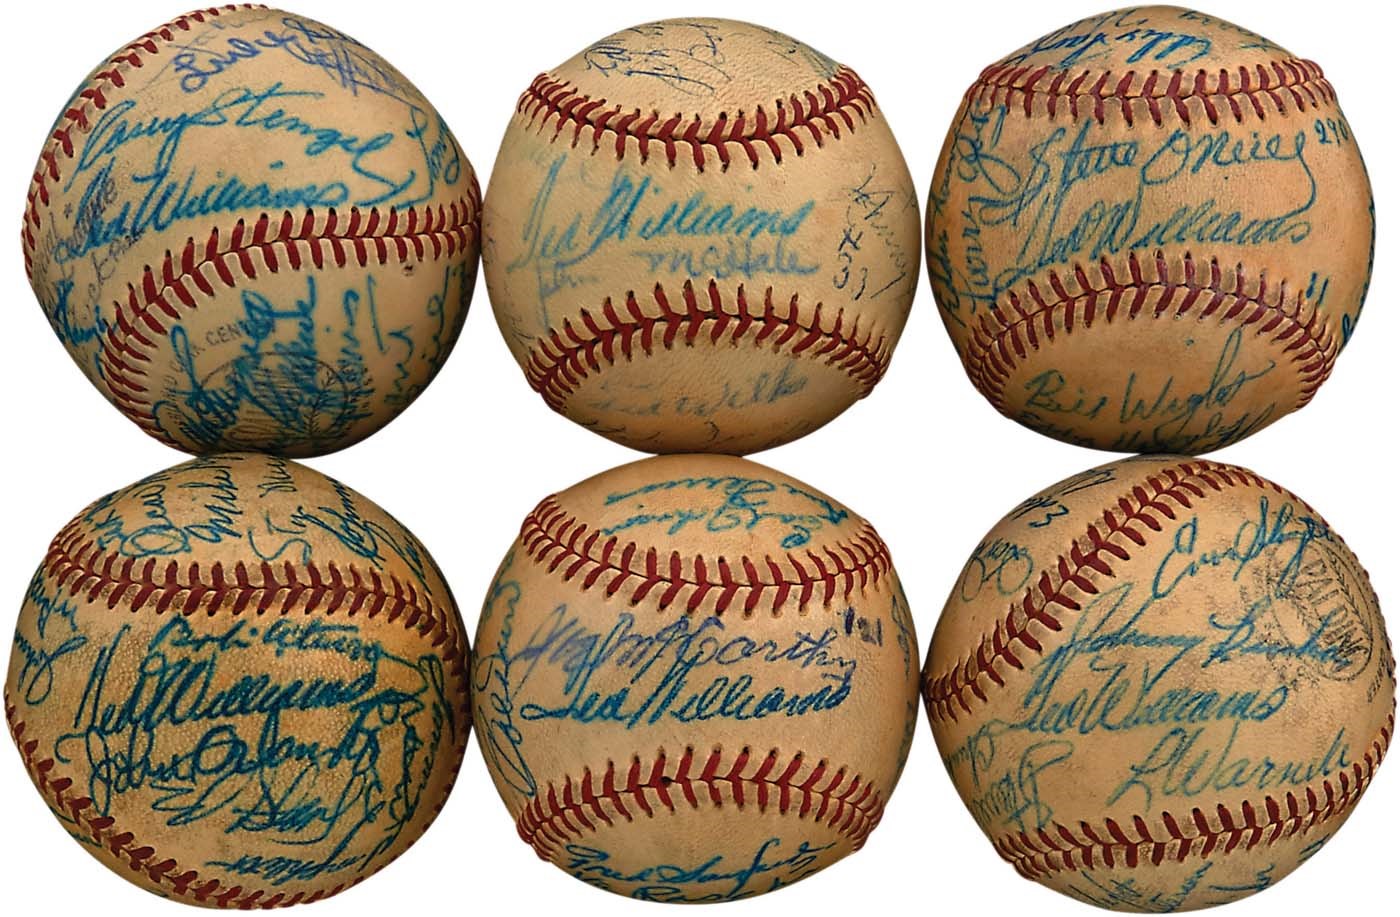 - 1940s-50s Red Sox Team & HOFers/Stars Signed Baseballs ALL w/Ted Williams (6)